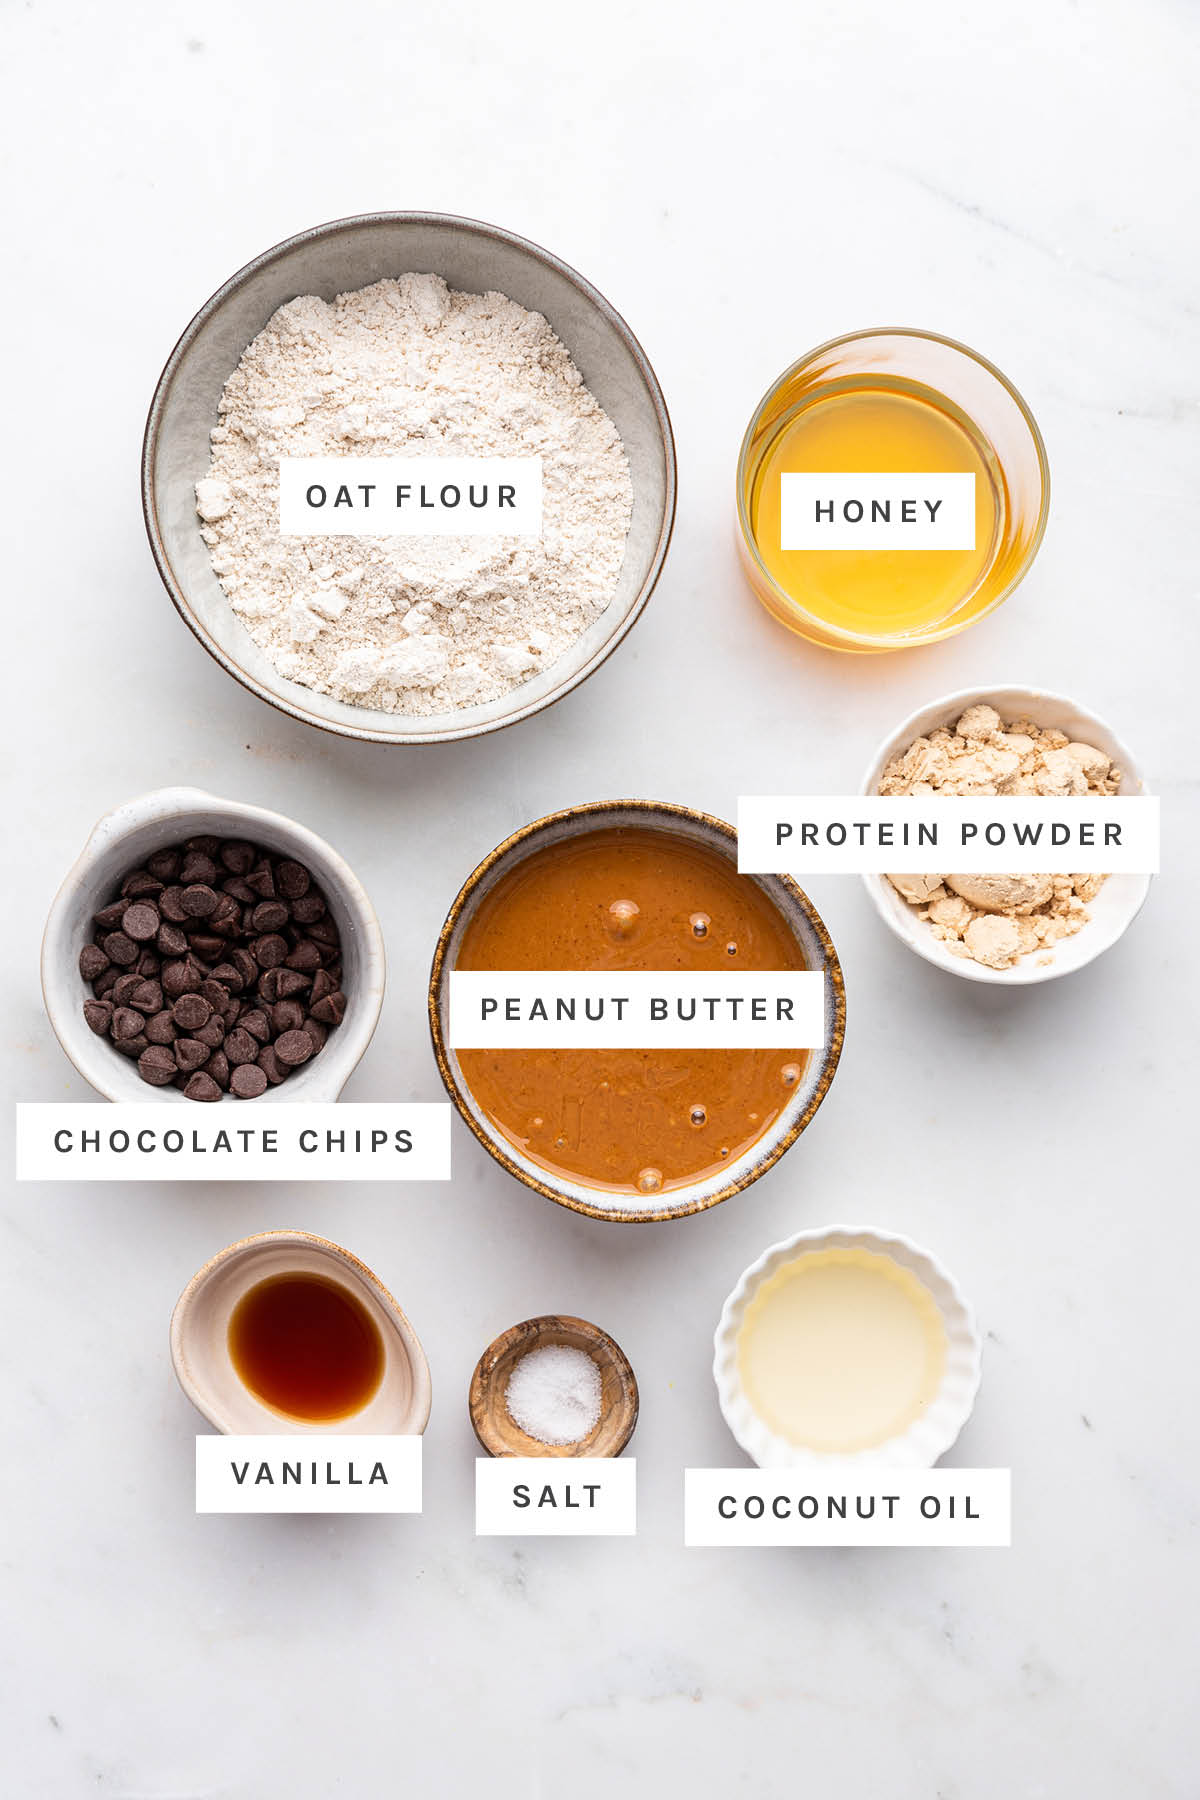 Ingredients measured out to make Easy Protein Bars: oat flour, honey, chocolate chips, peanut butter, protein powder, vanilla, salt and coconut oil.